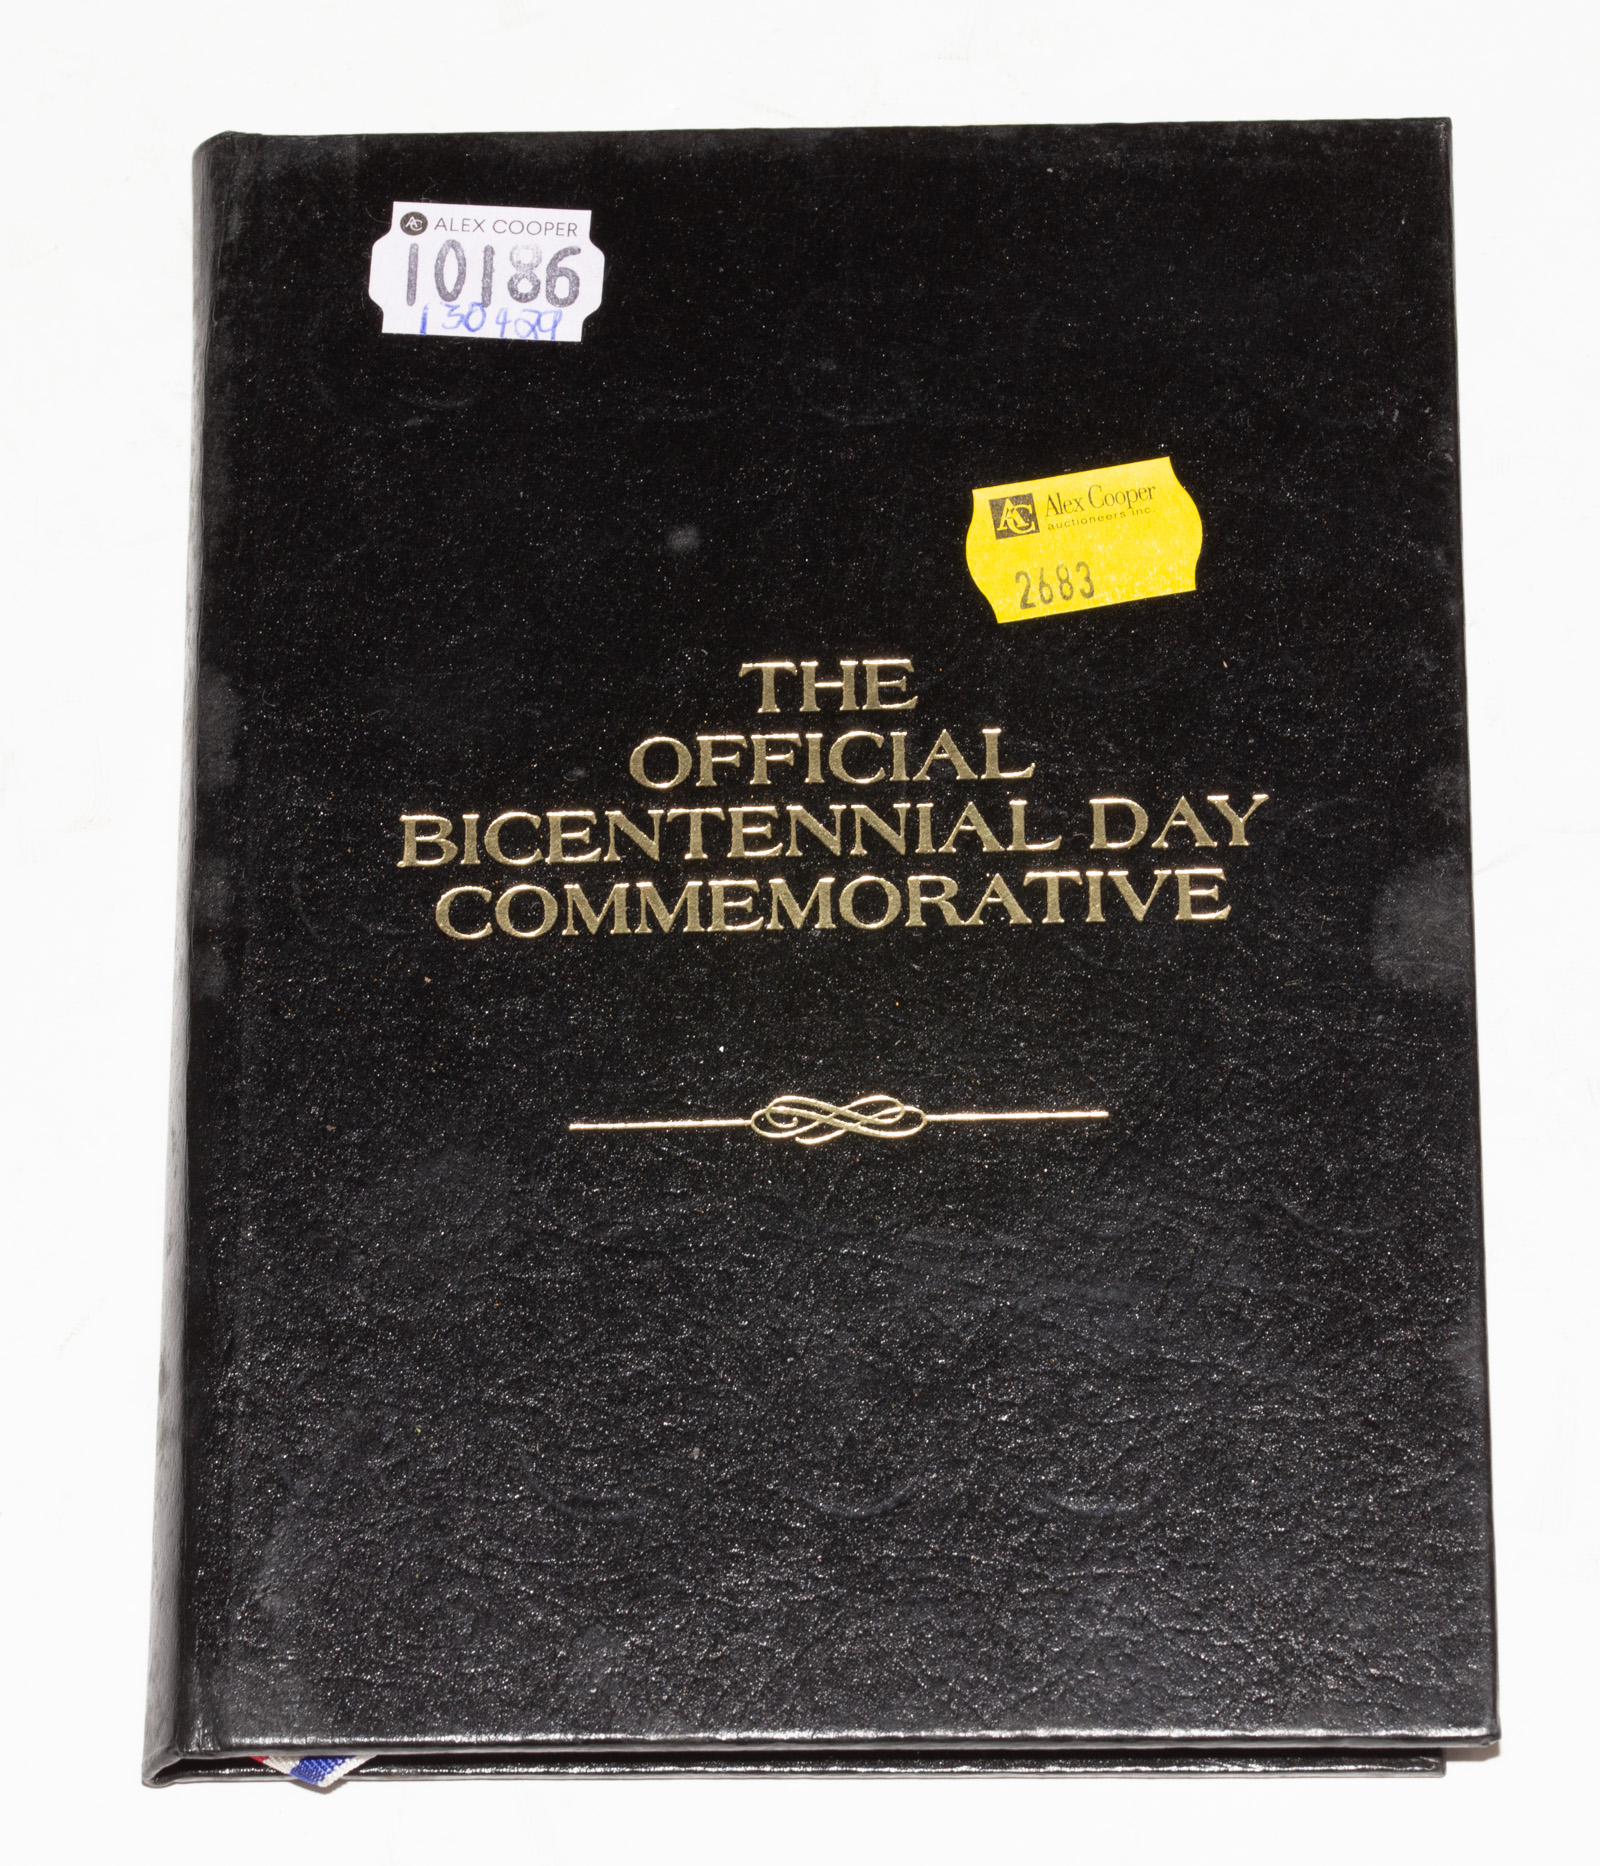 THE OFFICIAL BICENTENNIAL DAY COMMEMORATIVE